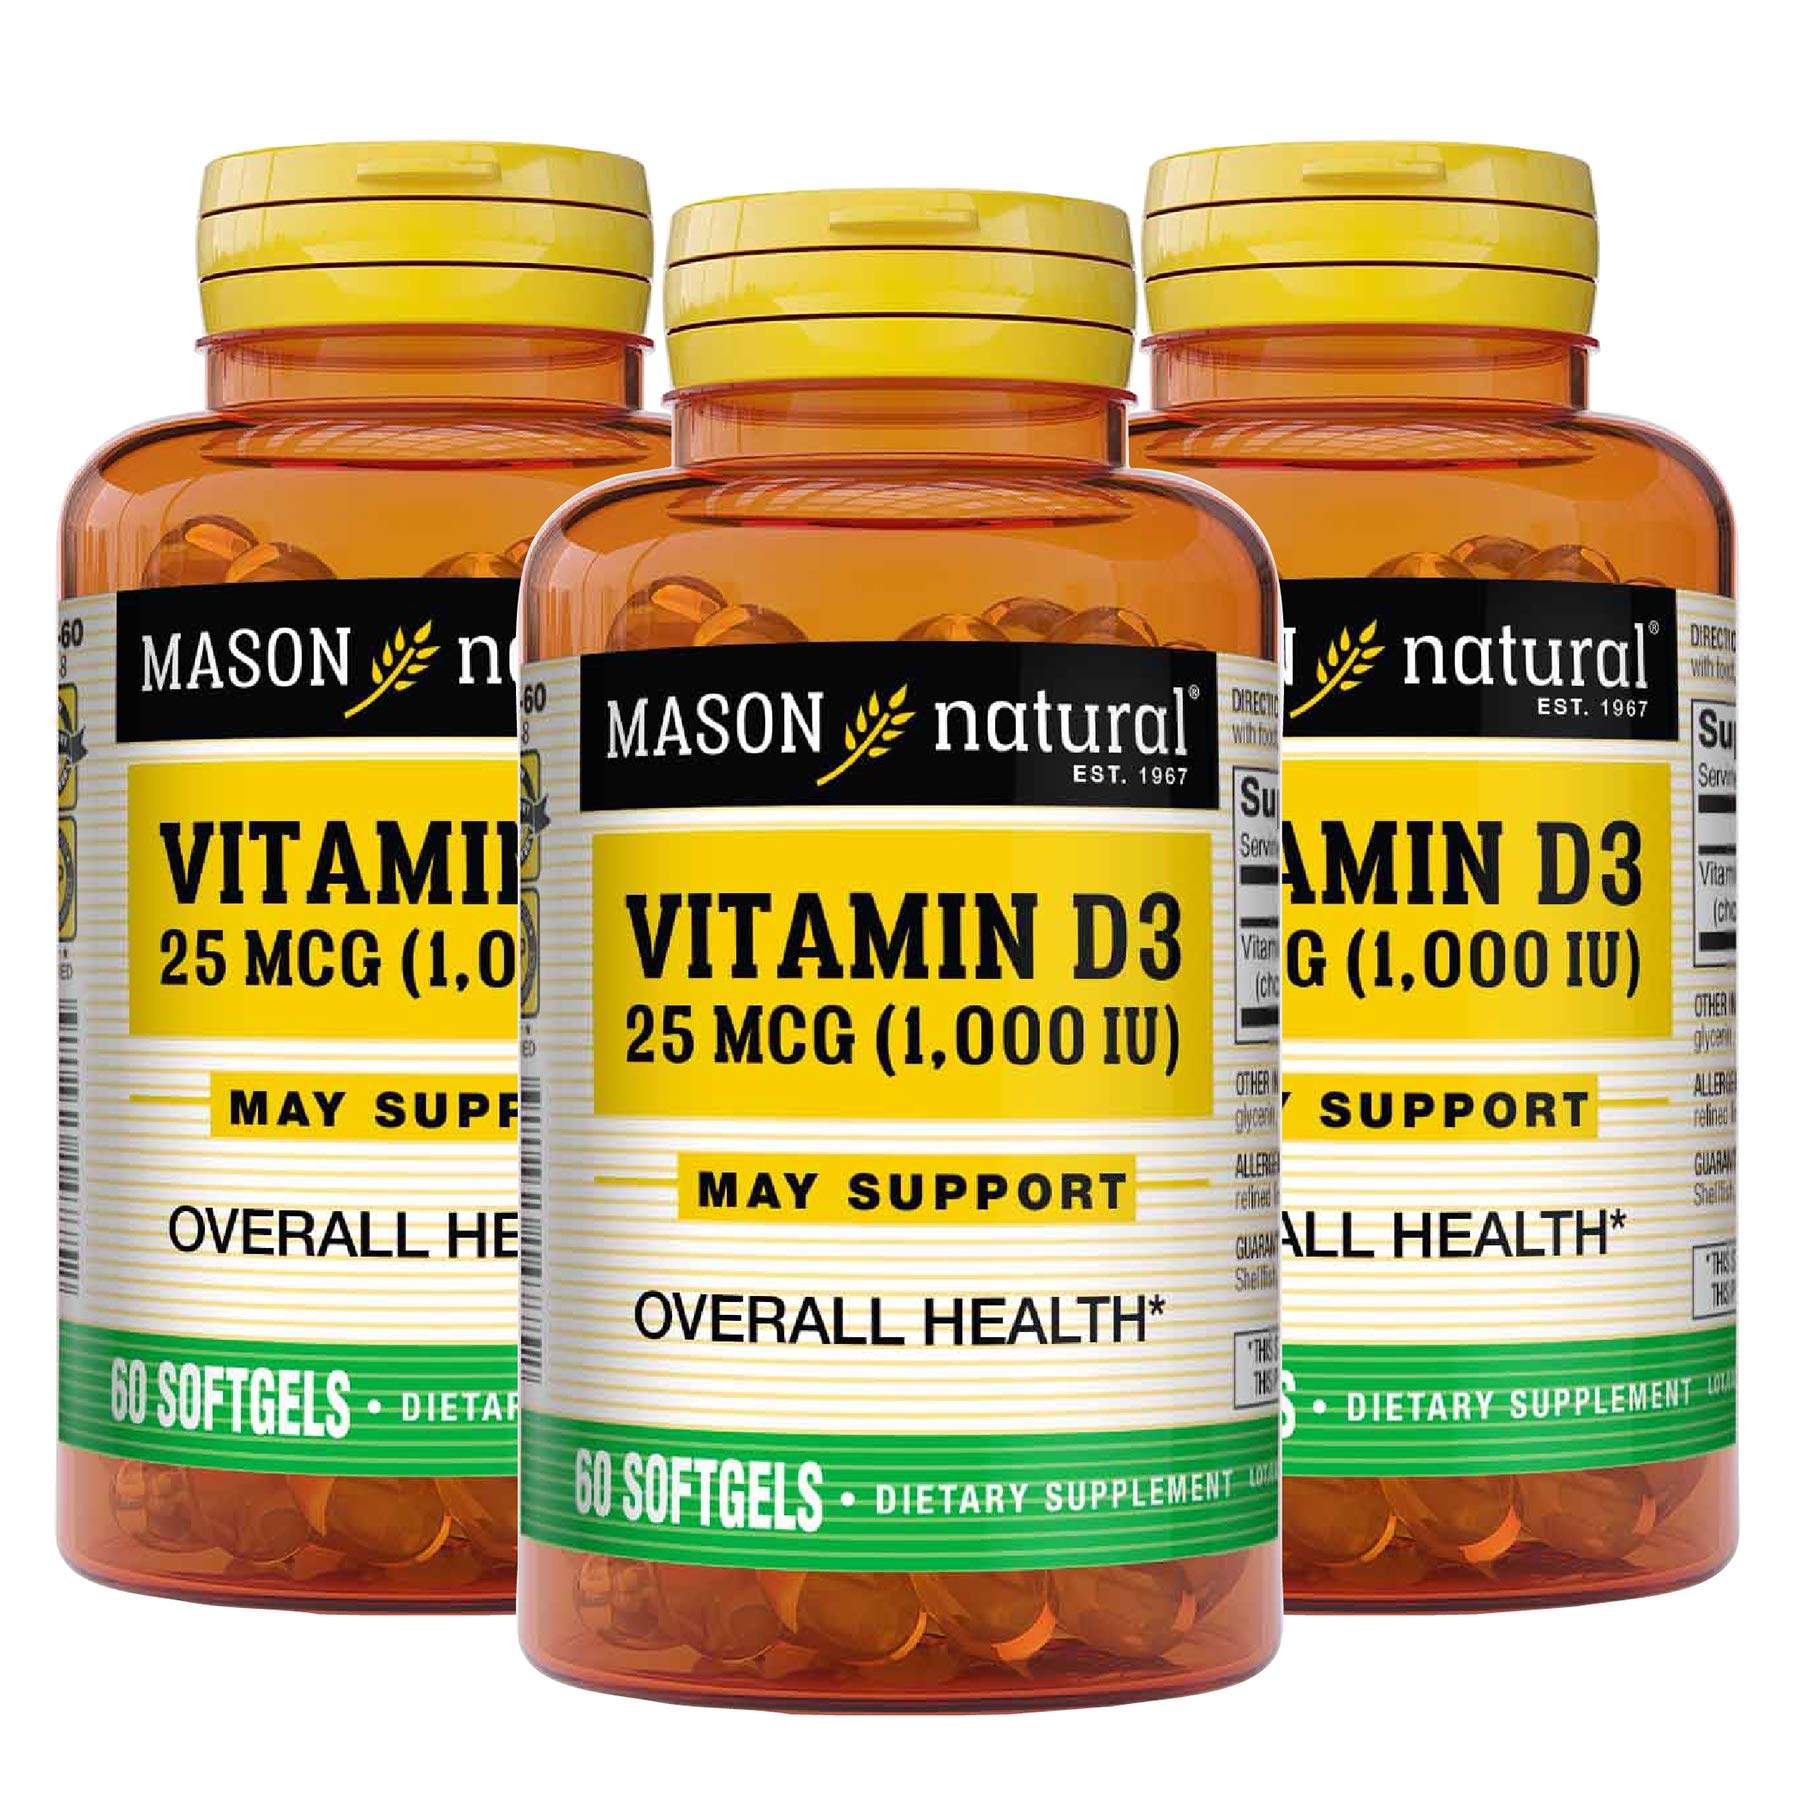 MASON NATURAL Vitamin D3 25 mcg (1000 IU) - Supports Overall Health, Strengthens Bones and Muscles, from Fish Liver Oil, 60 Softgels (Pack of 3)